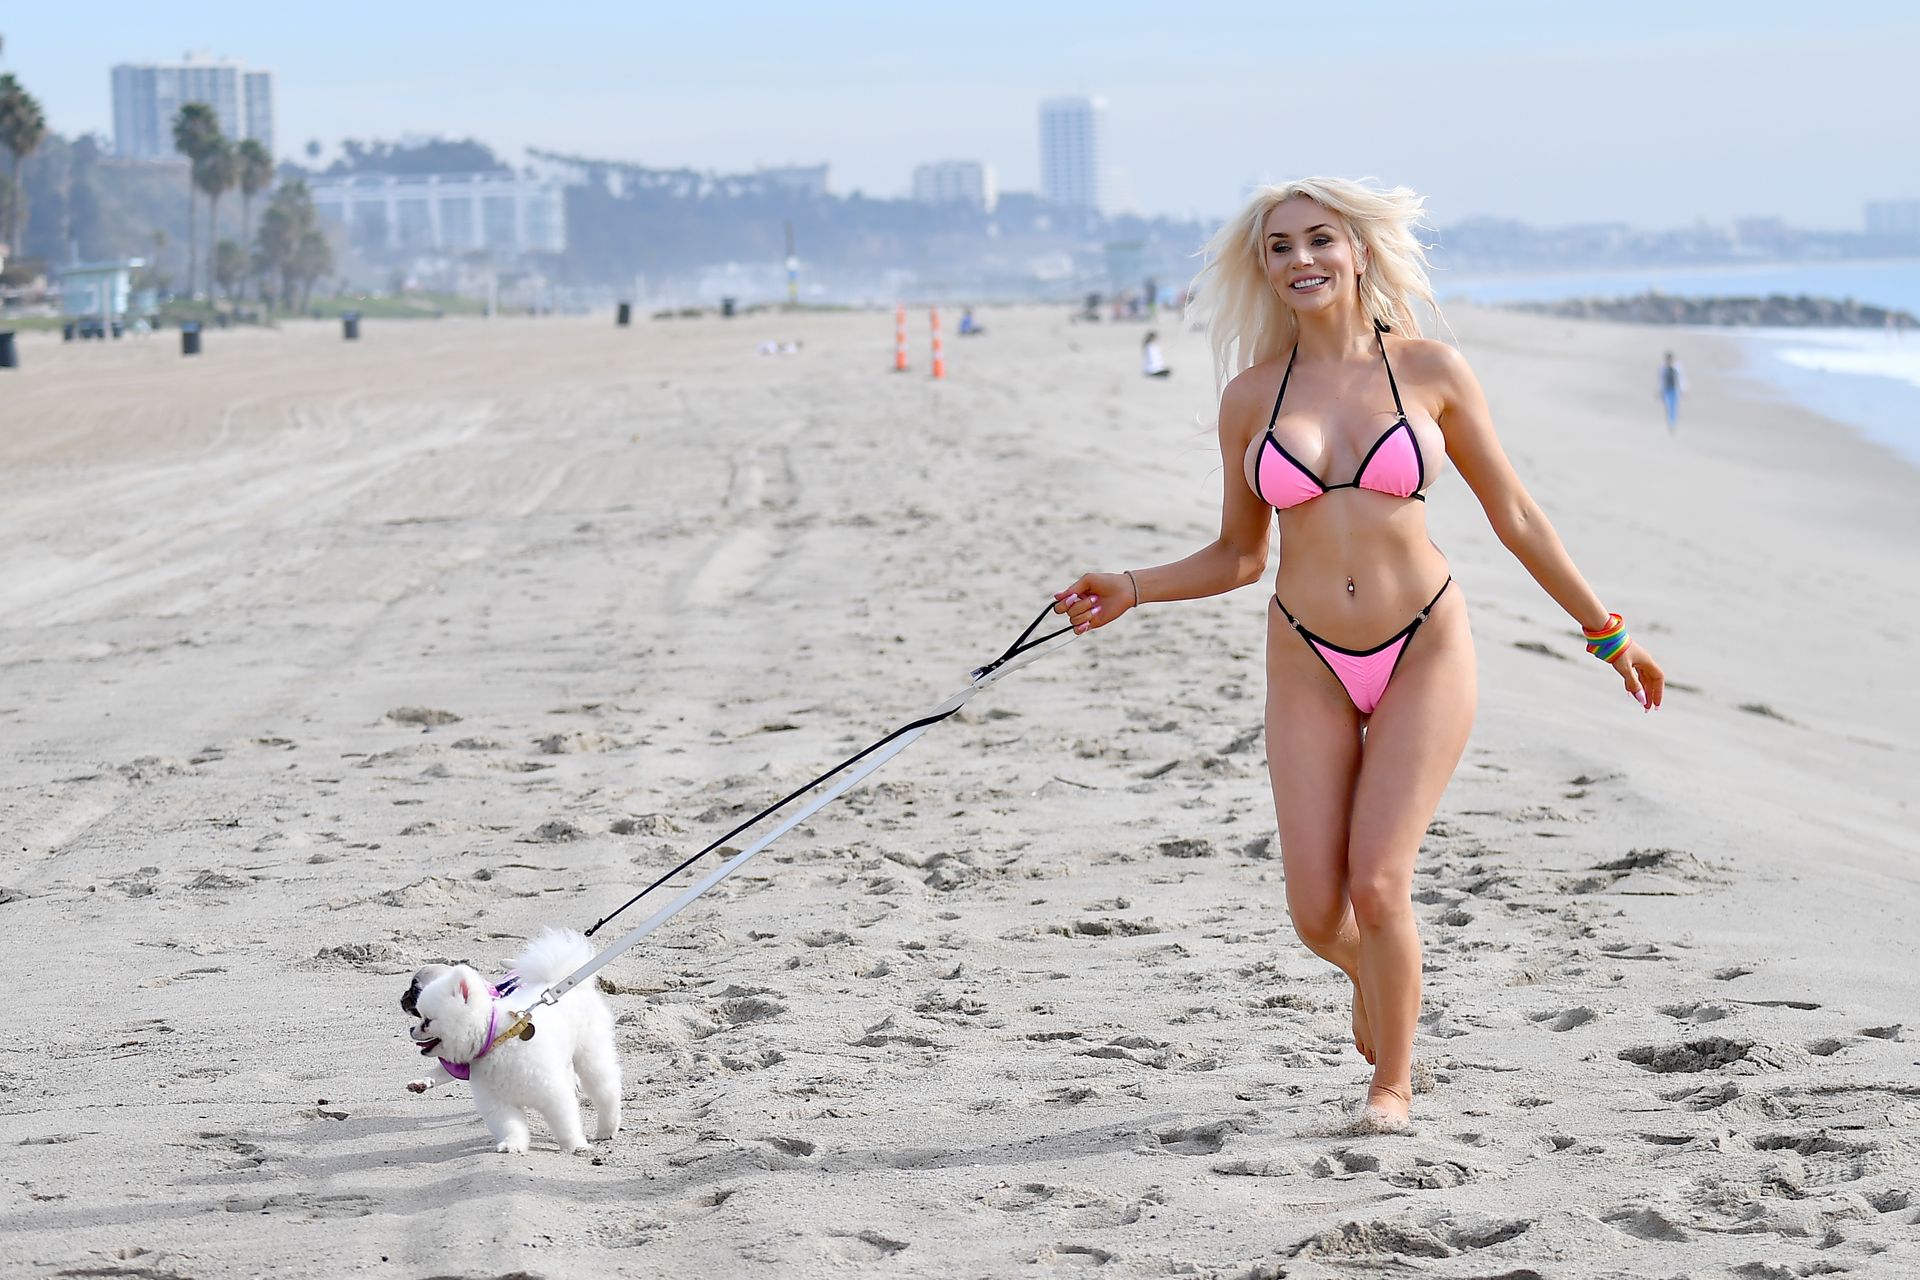 Busty Courtney Stodden Poses On The Beach In Santa Monica 0011